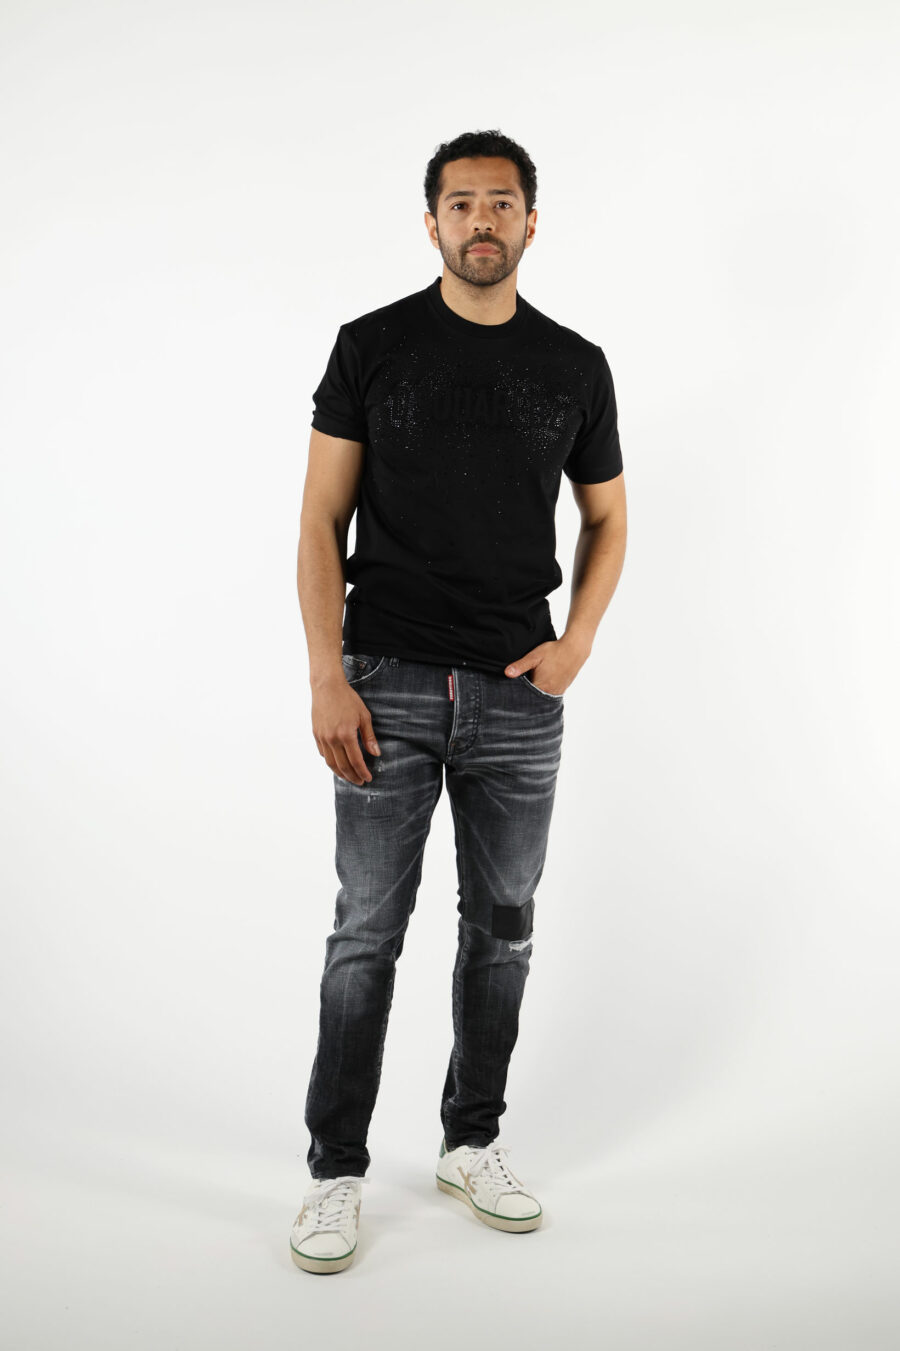 Black "skater jean" jeans with patch and semi-worn - 111289